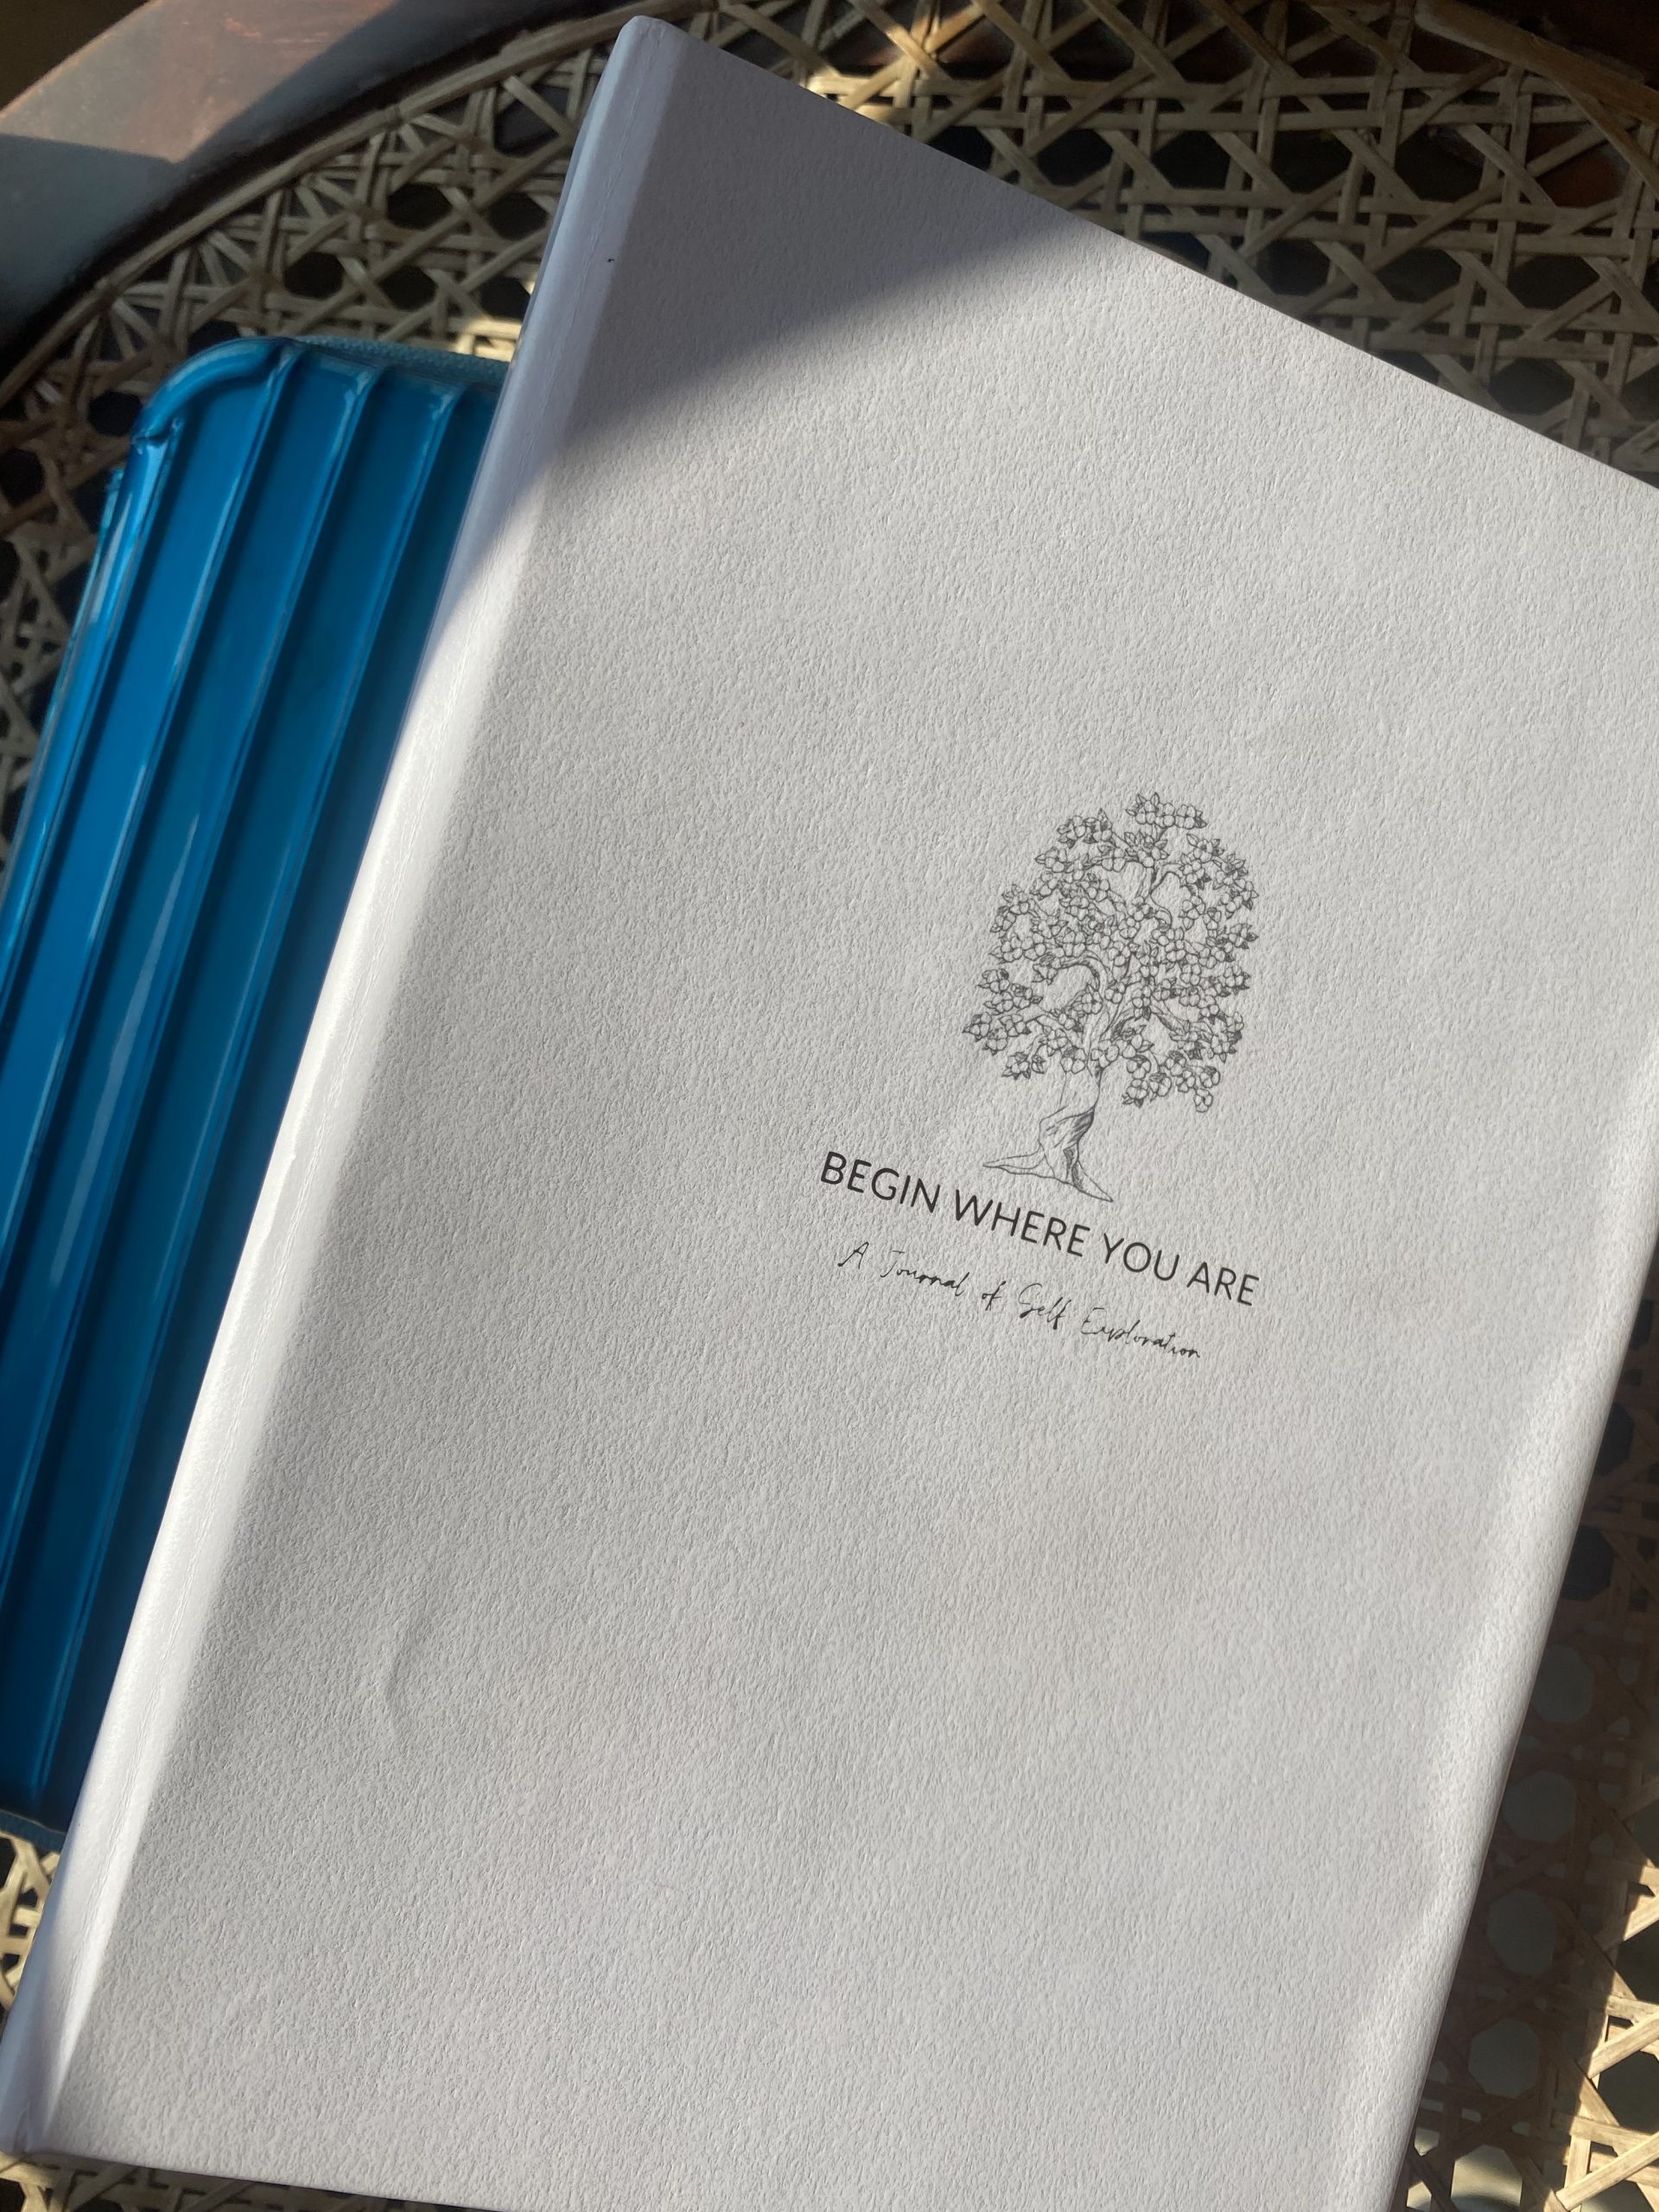 Begin Where You Are- A Journal of Self-exploration by Minal Rath.